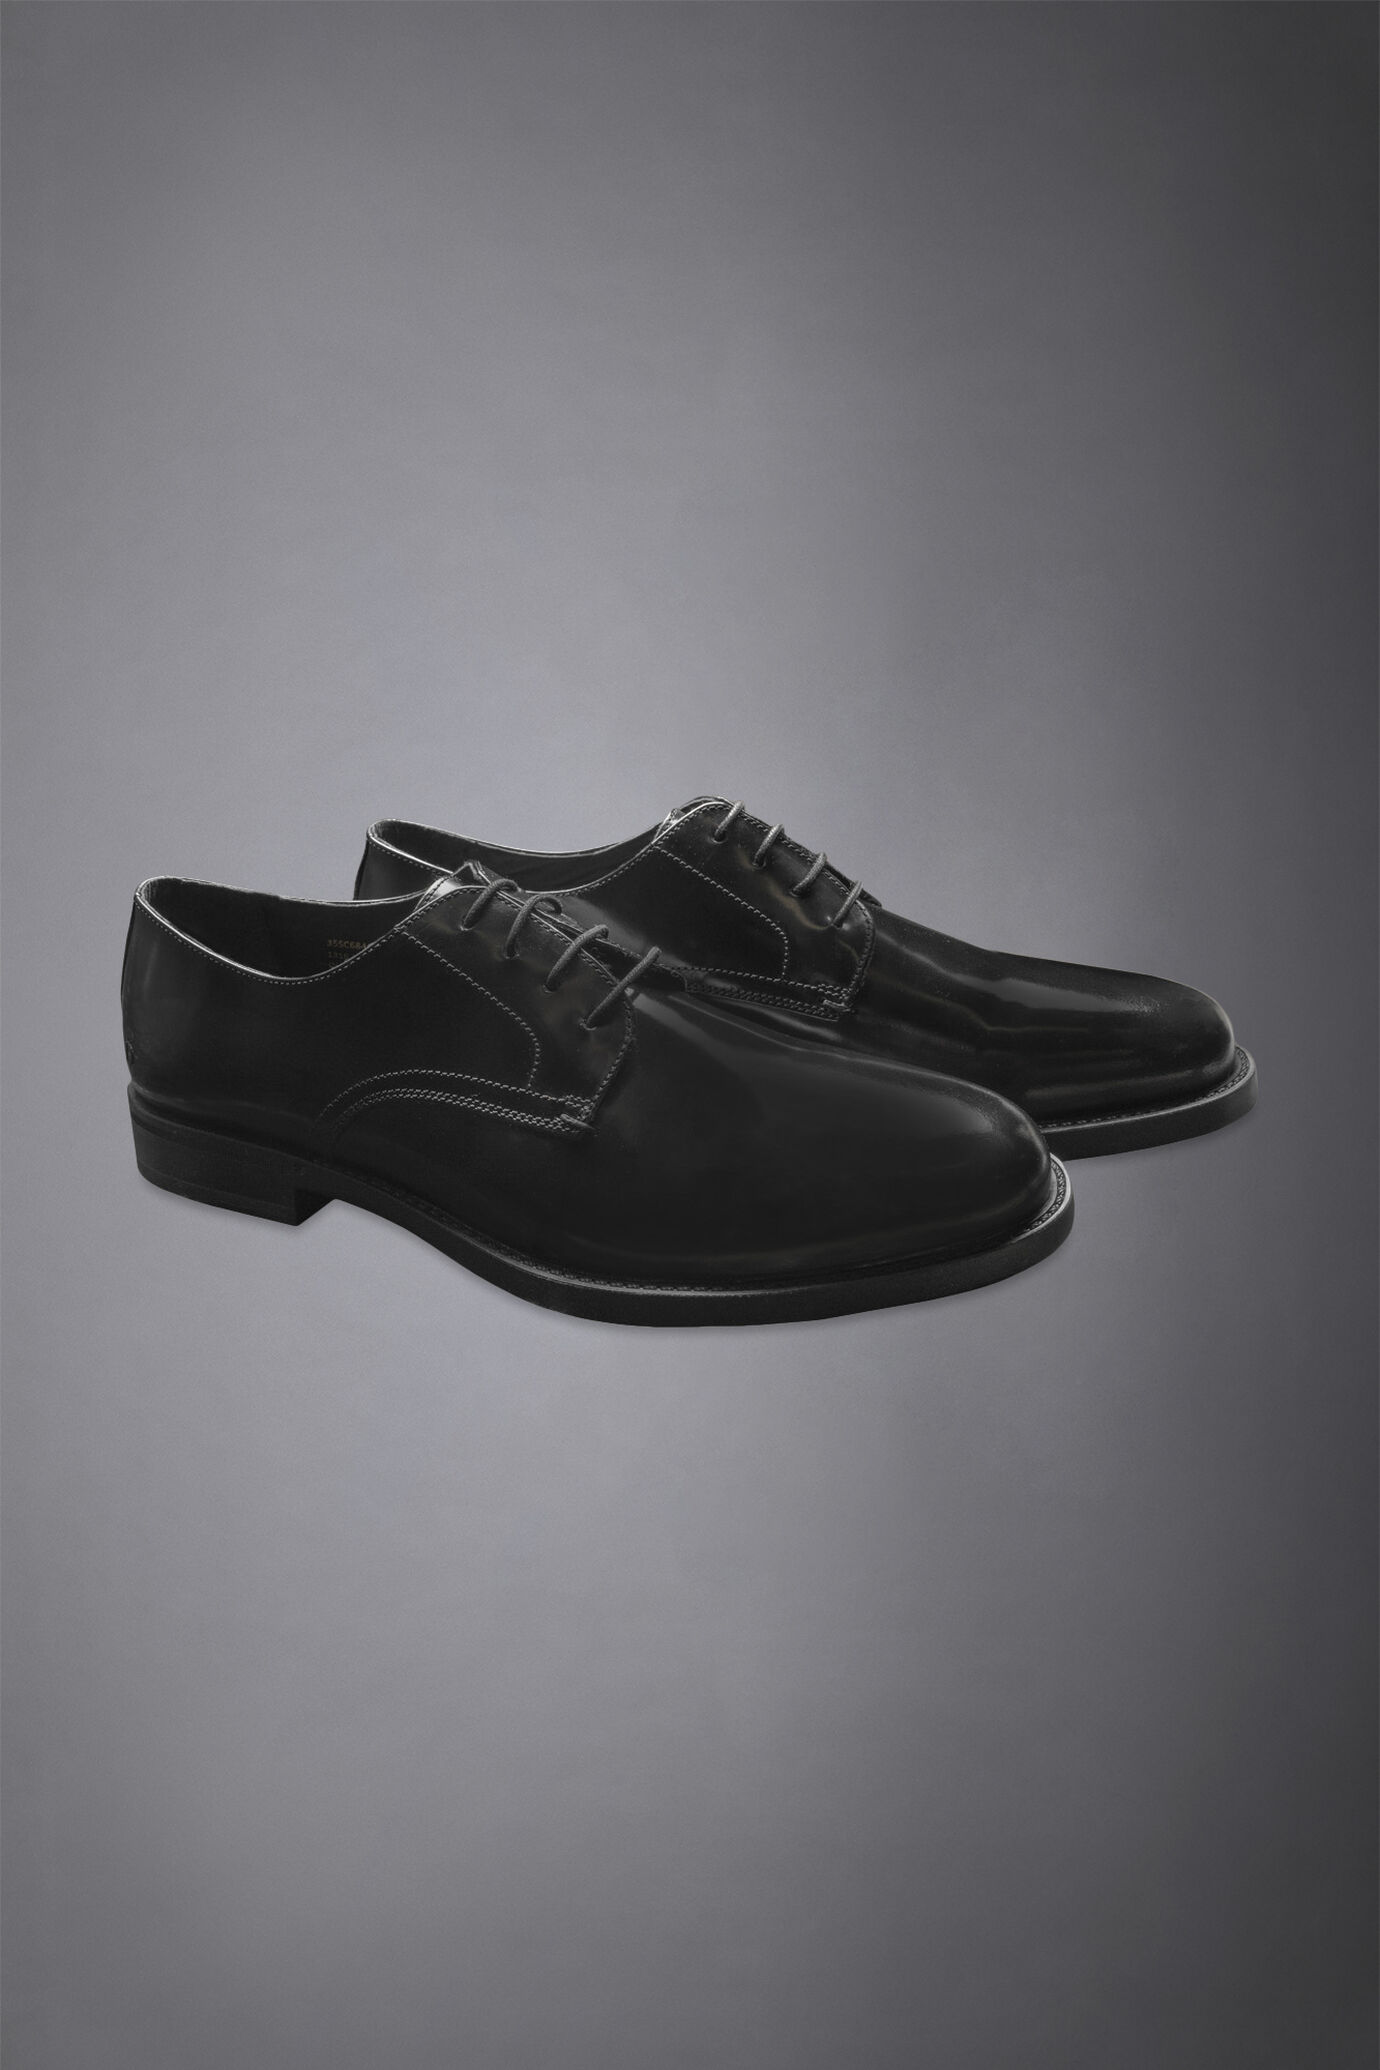 Derby shoe 100% leather with rubber sole